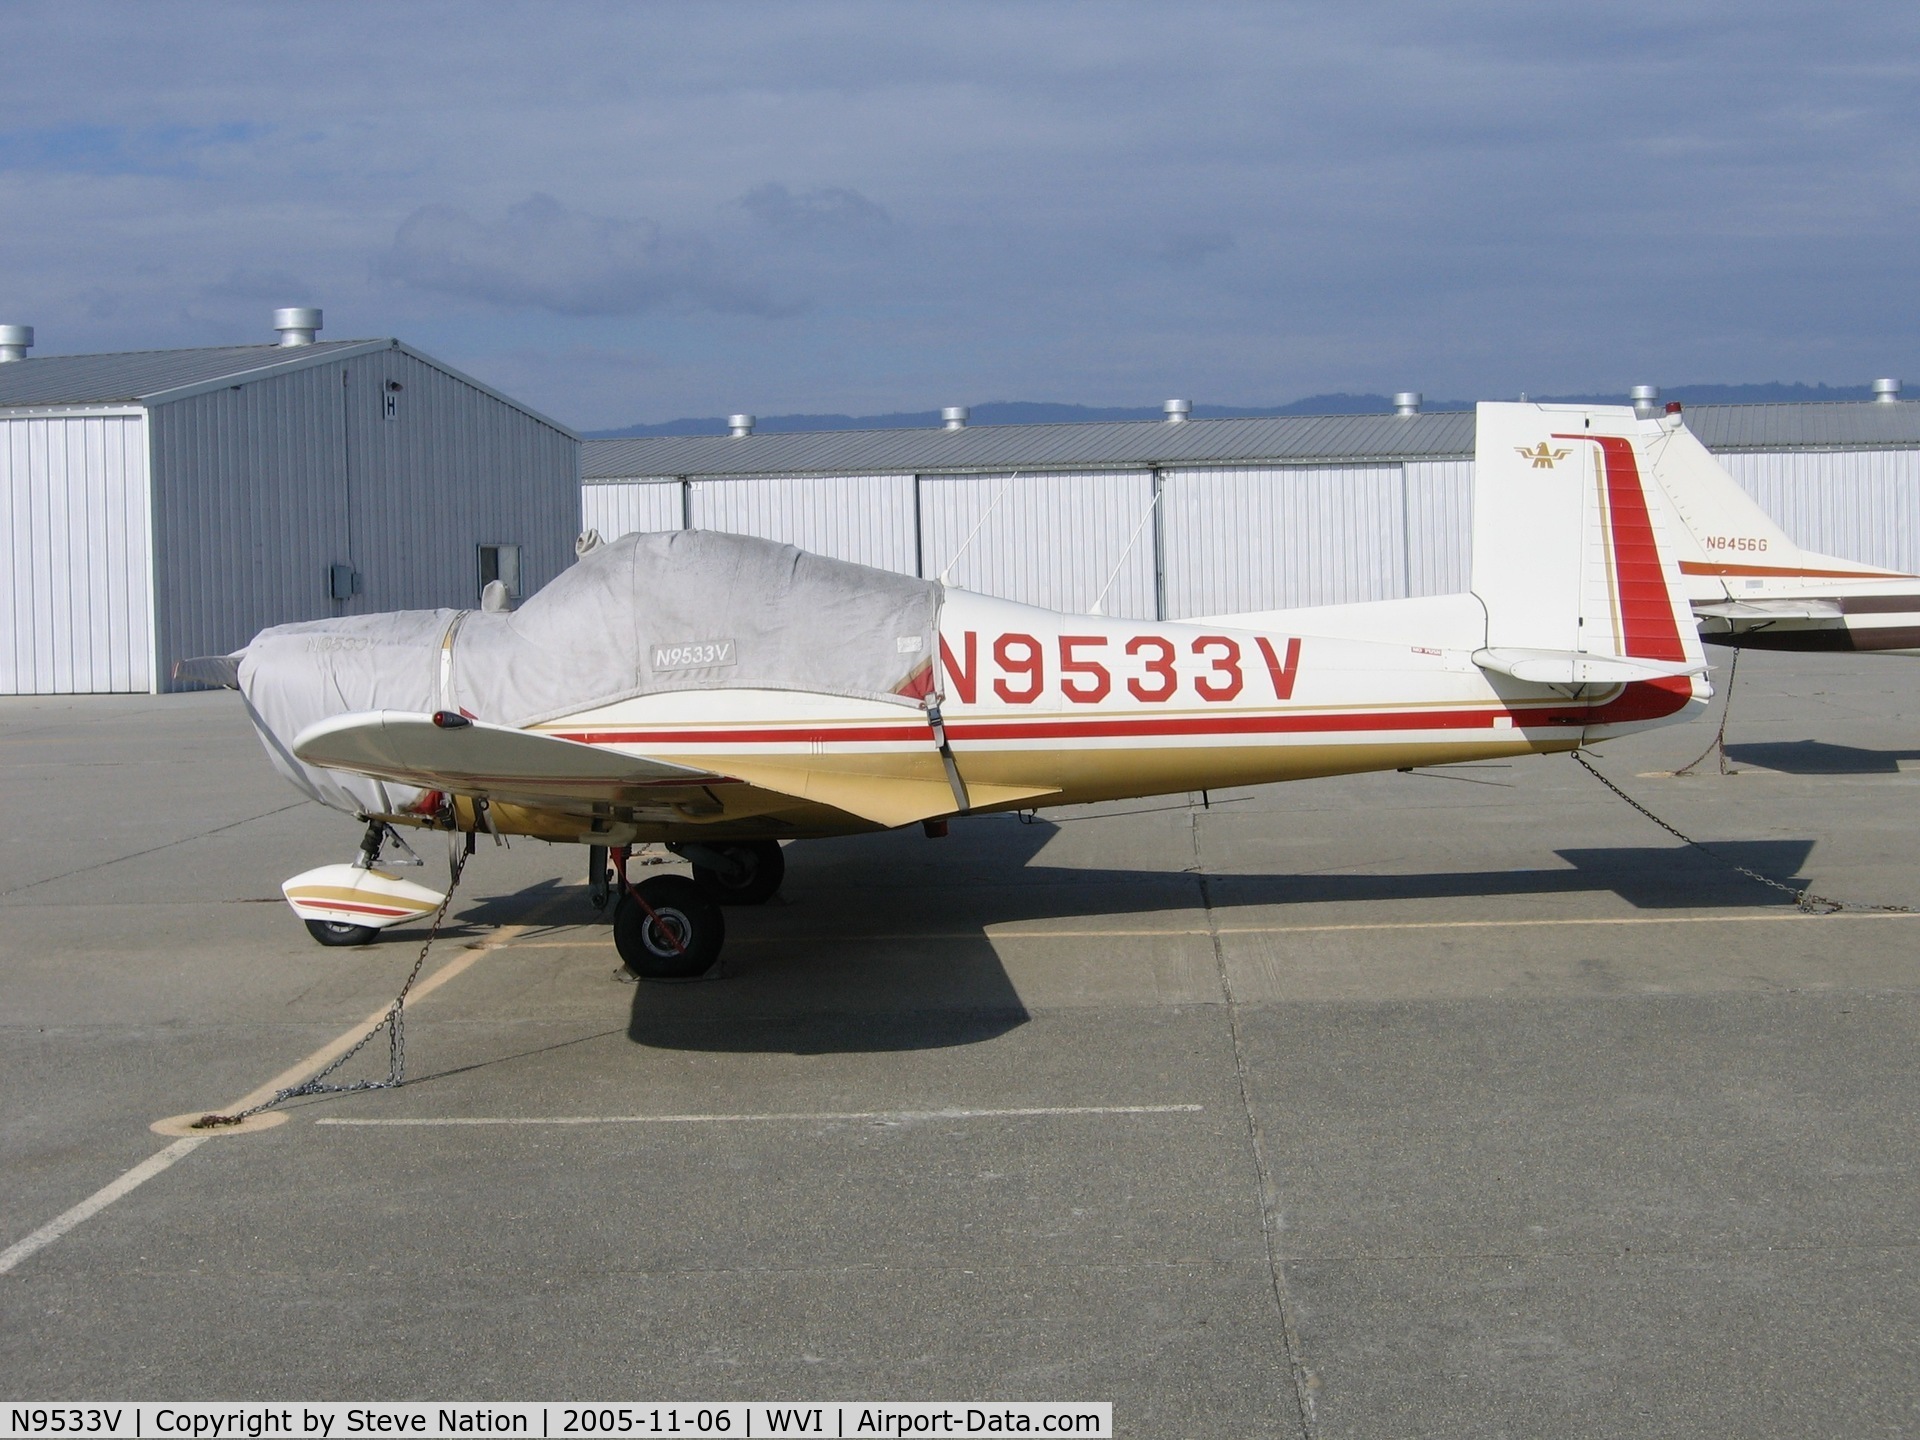 N9533V, 1970 Mooney M10 Cadet C/N 700023, 1970 Mooney M10 at Watsonville, CA.  Destroyed March 25,2006 when acft impacted high terrain 20 miles E of Salinas, CA after pilot lost control in IFR conditions. New pilot owner flying acft from WVI to Plainview, TX fatally injured.